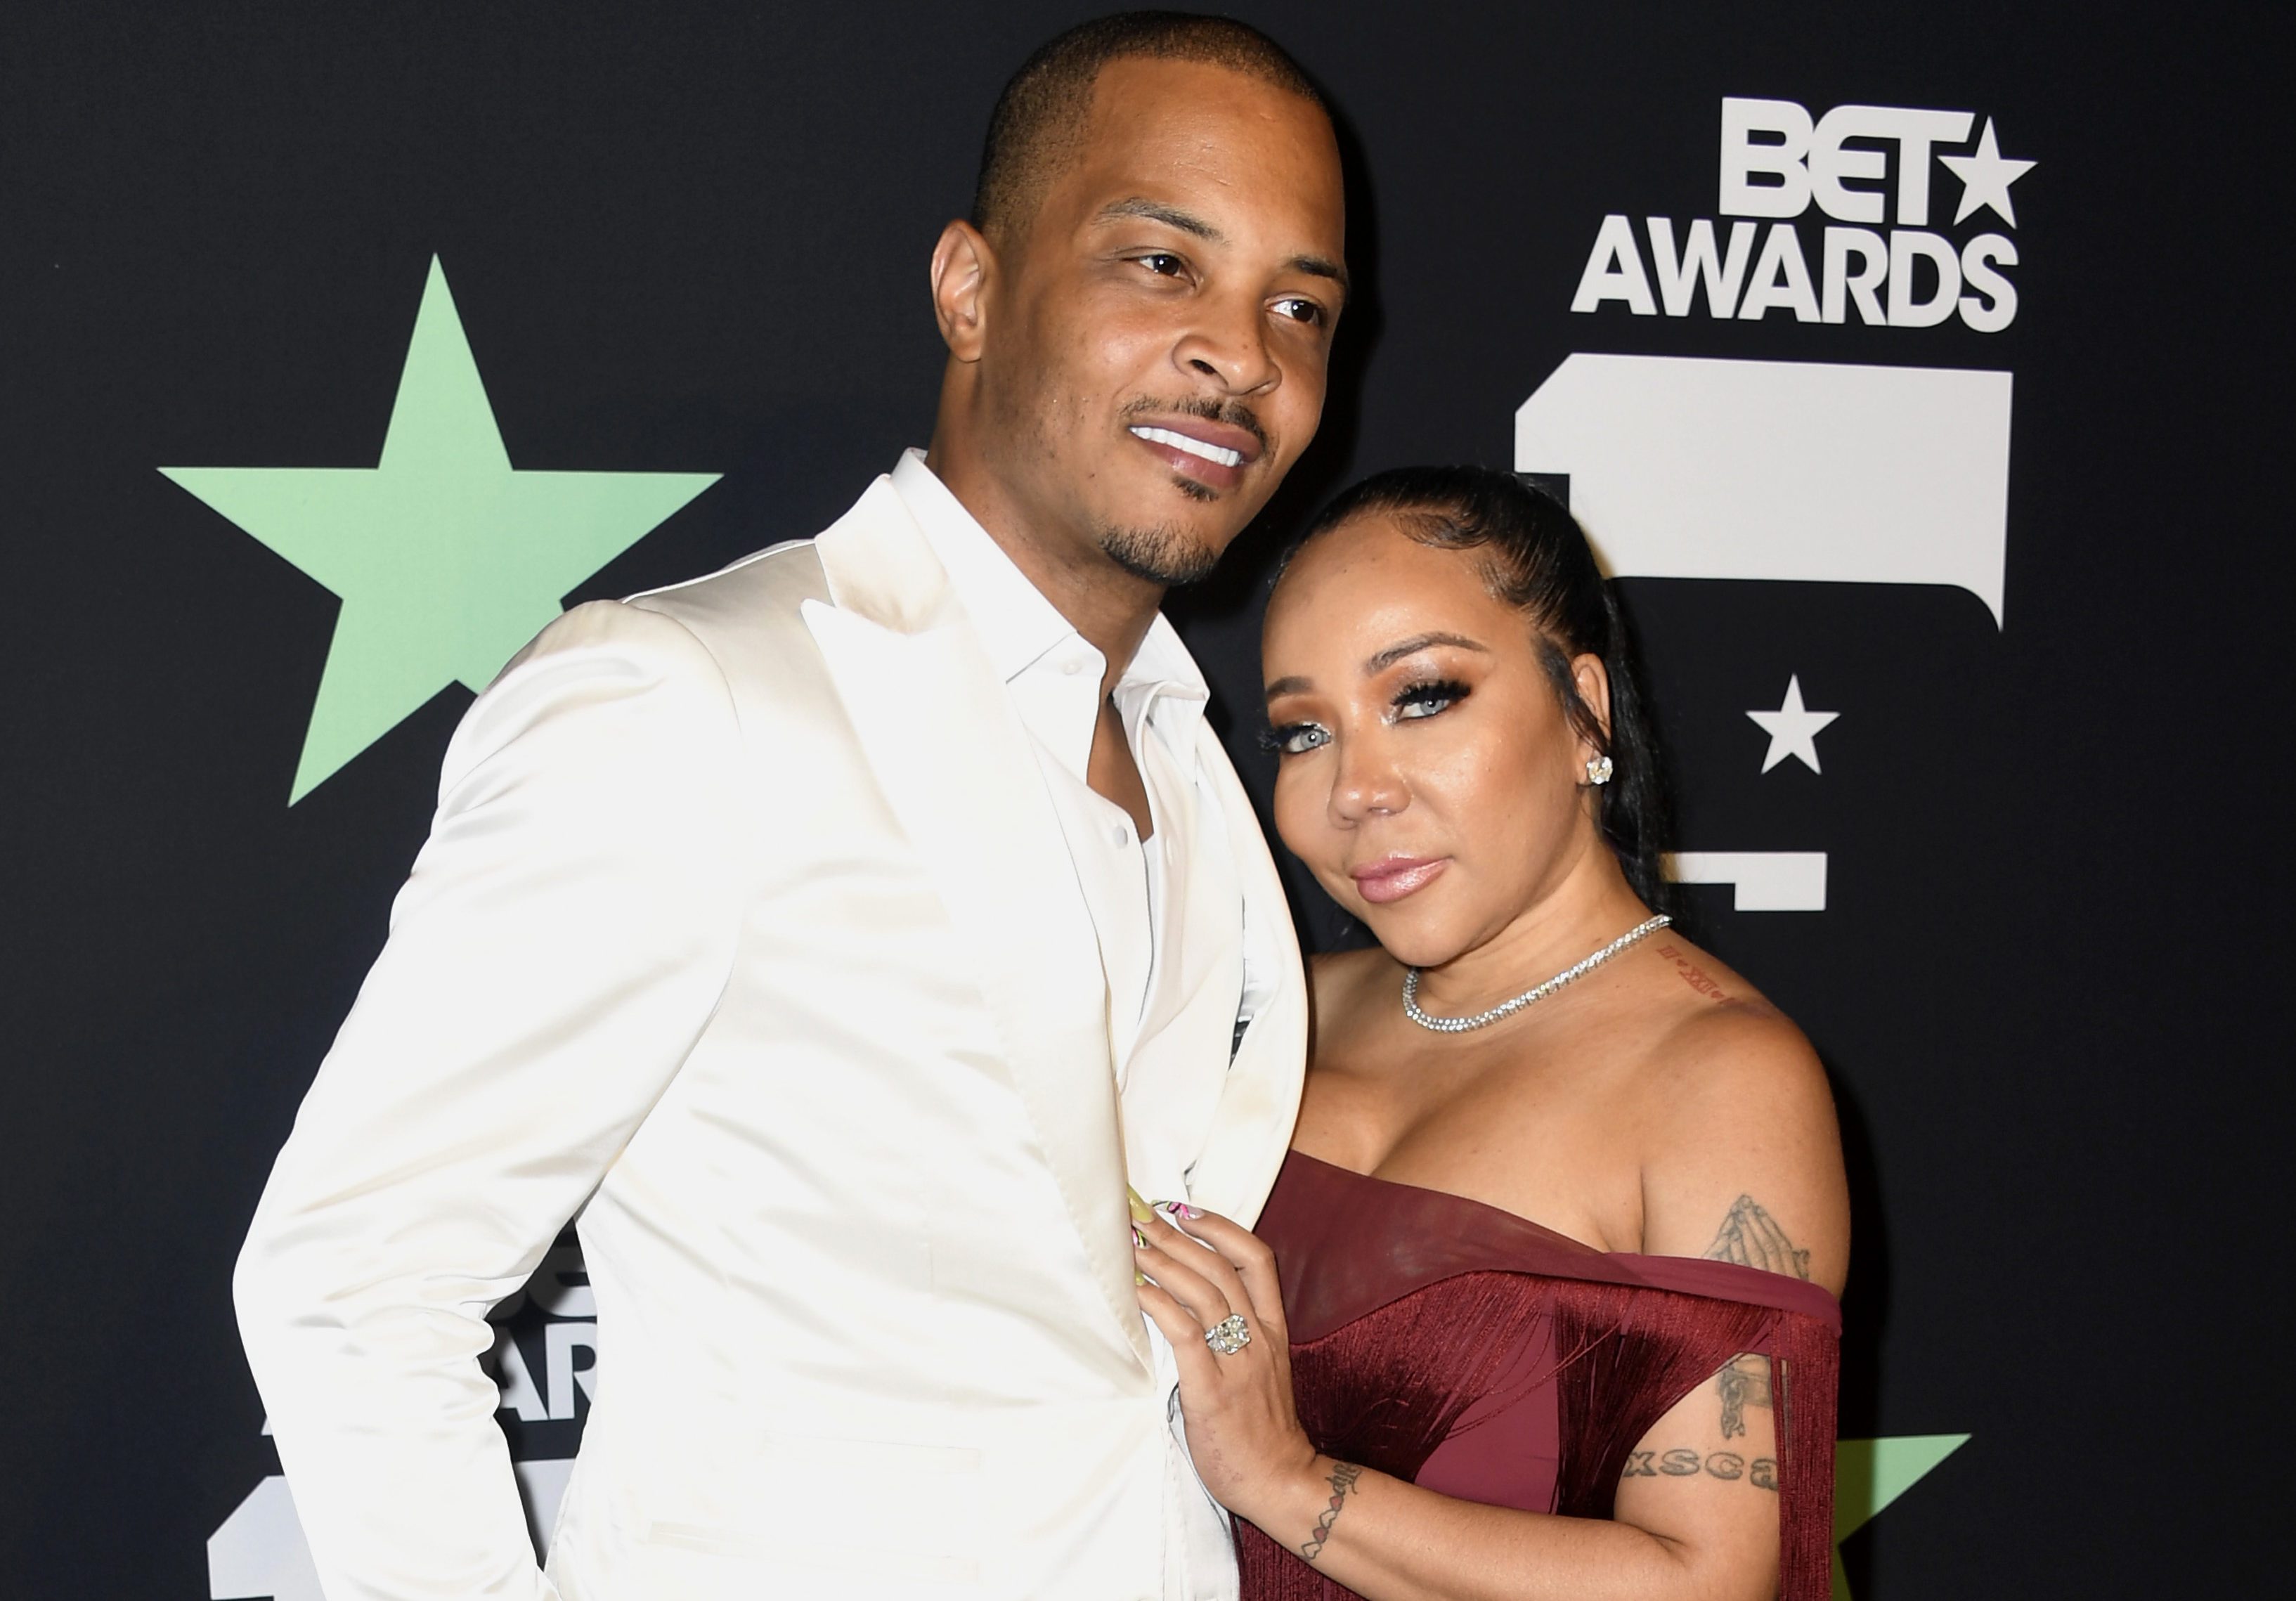 An attorney for TI and Tiny denied the new allegations made by a Los Angeles woman and said the pair had not been contacted by police.